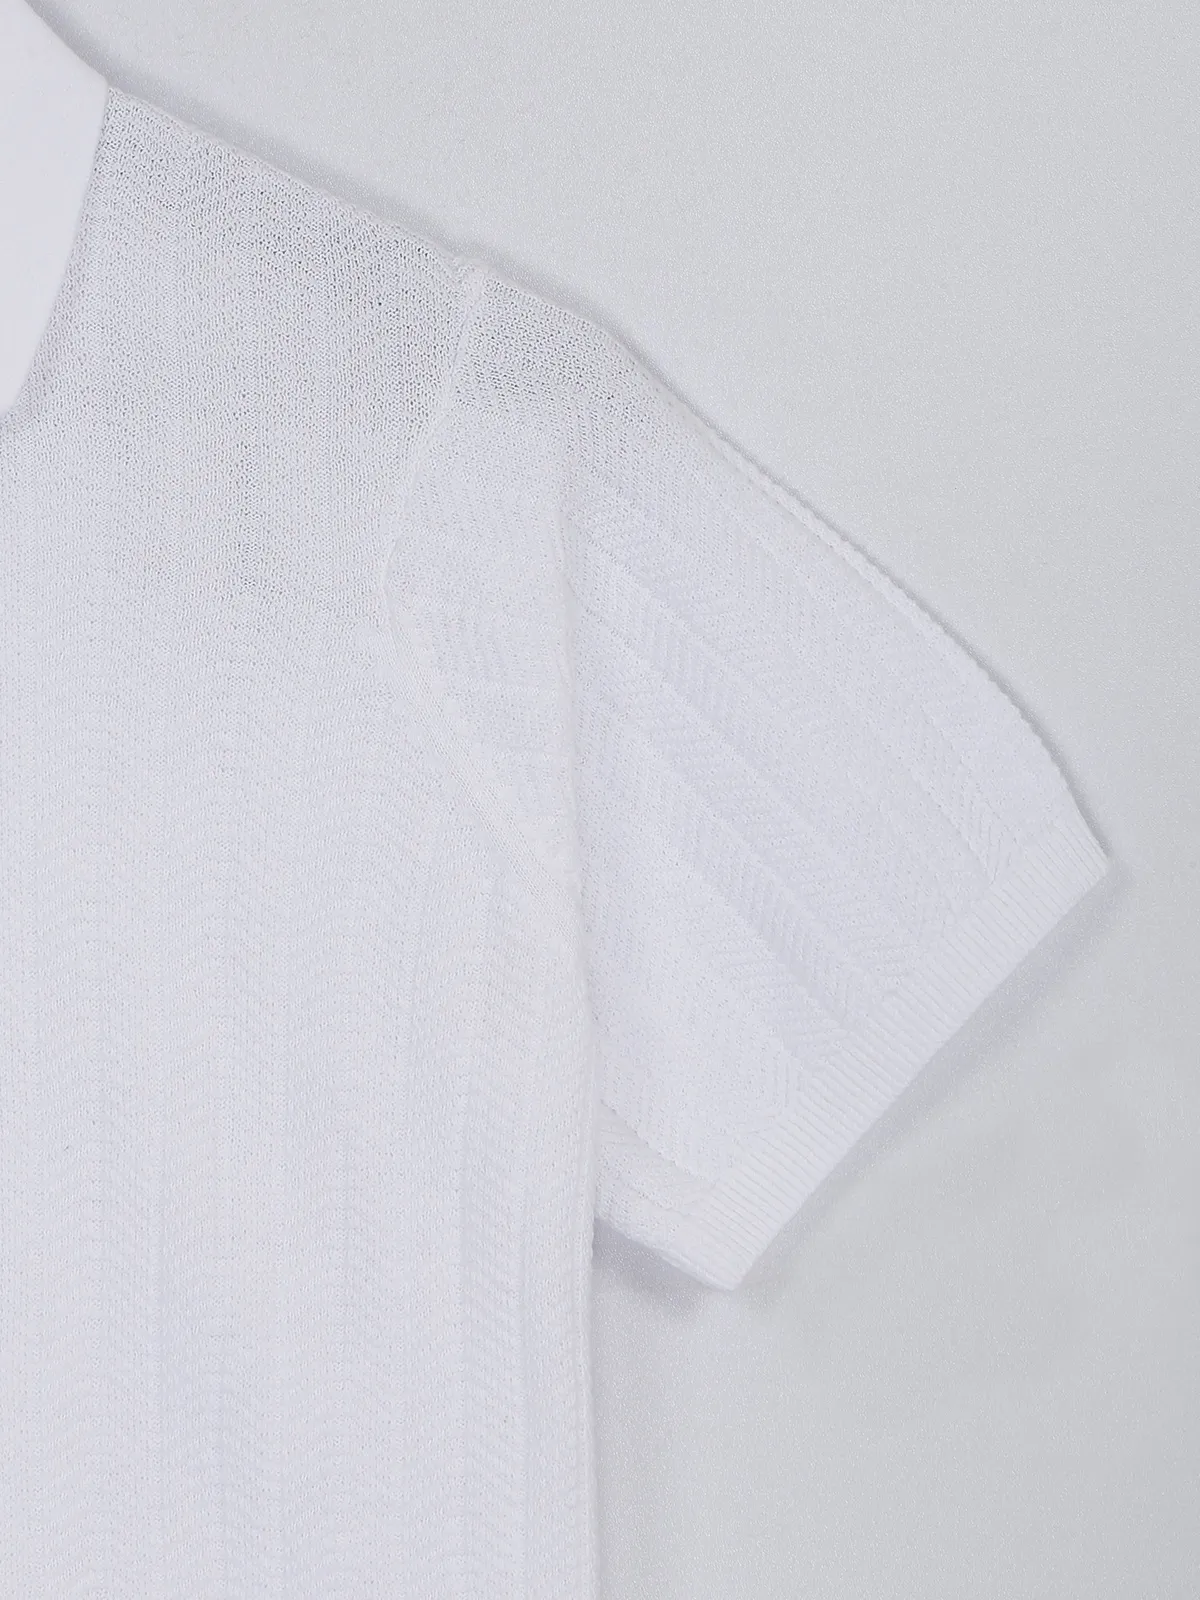 Celio knitted t shirt in white